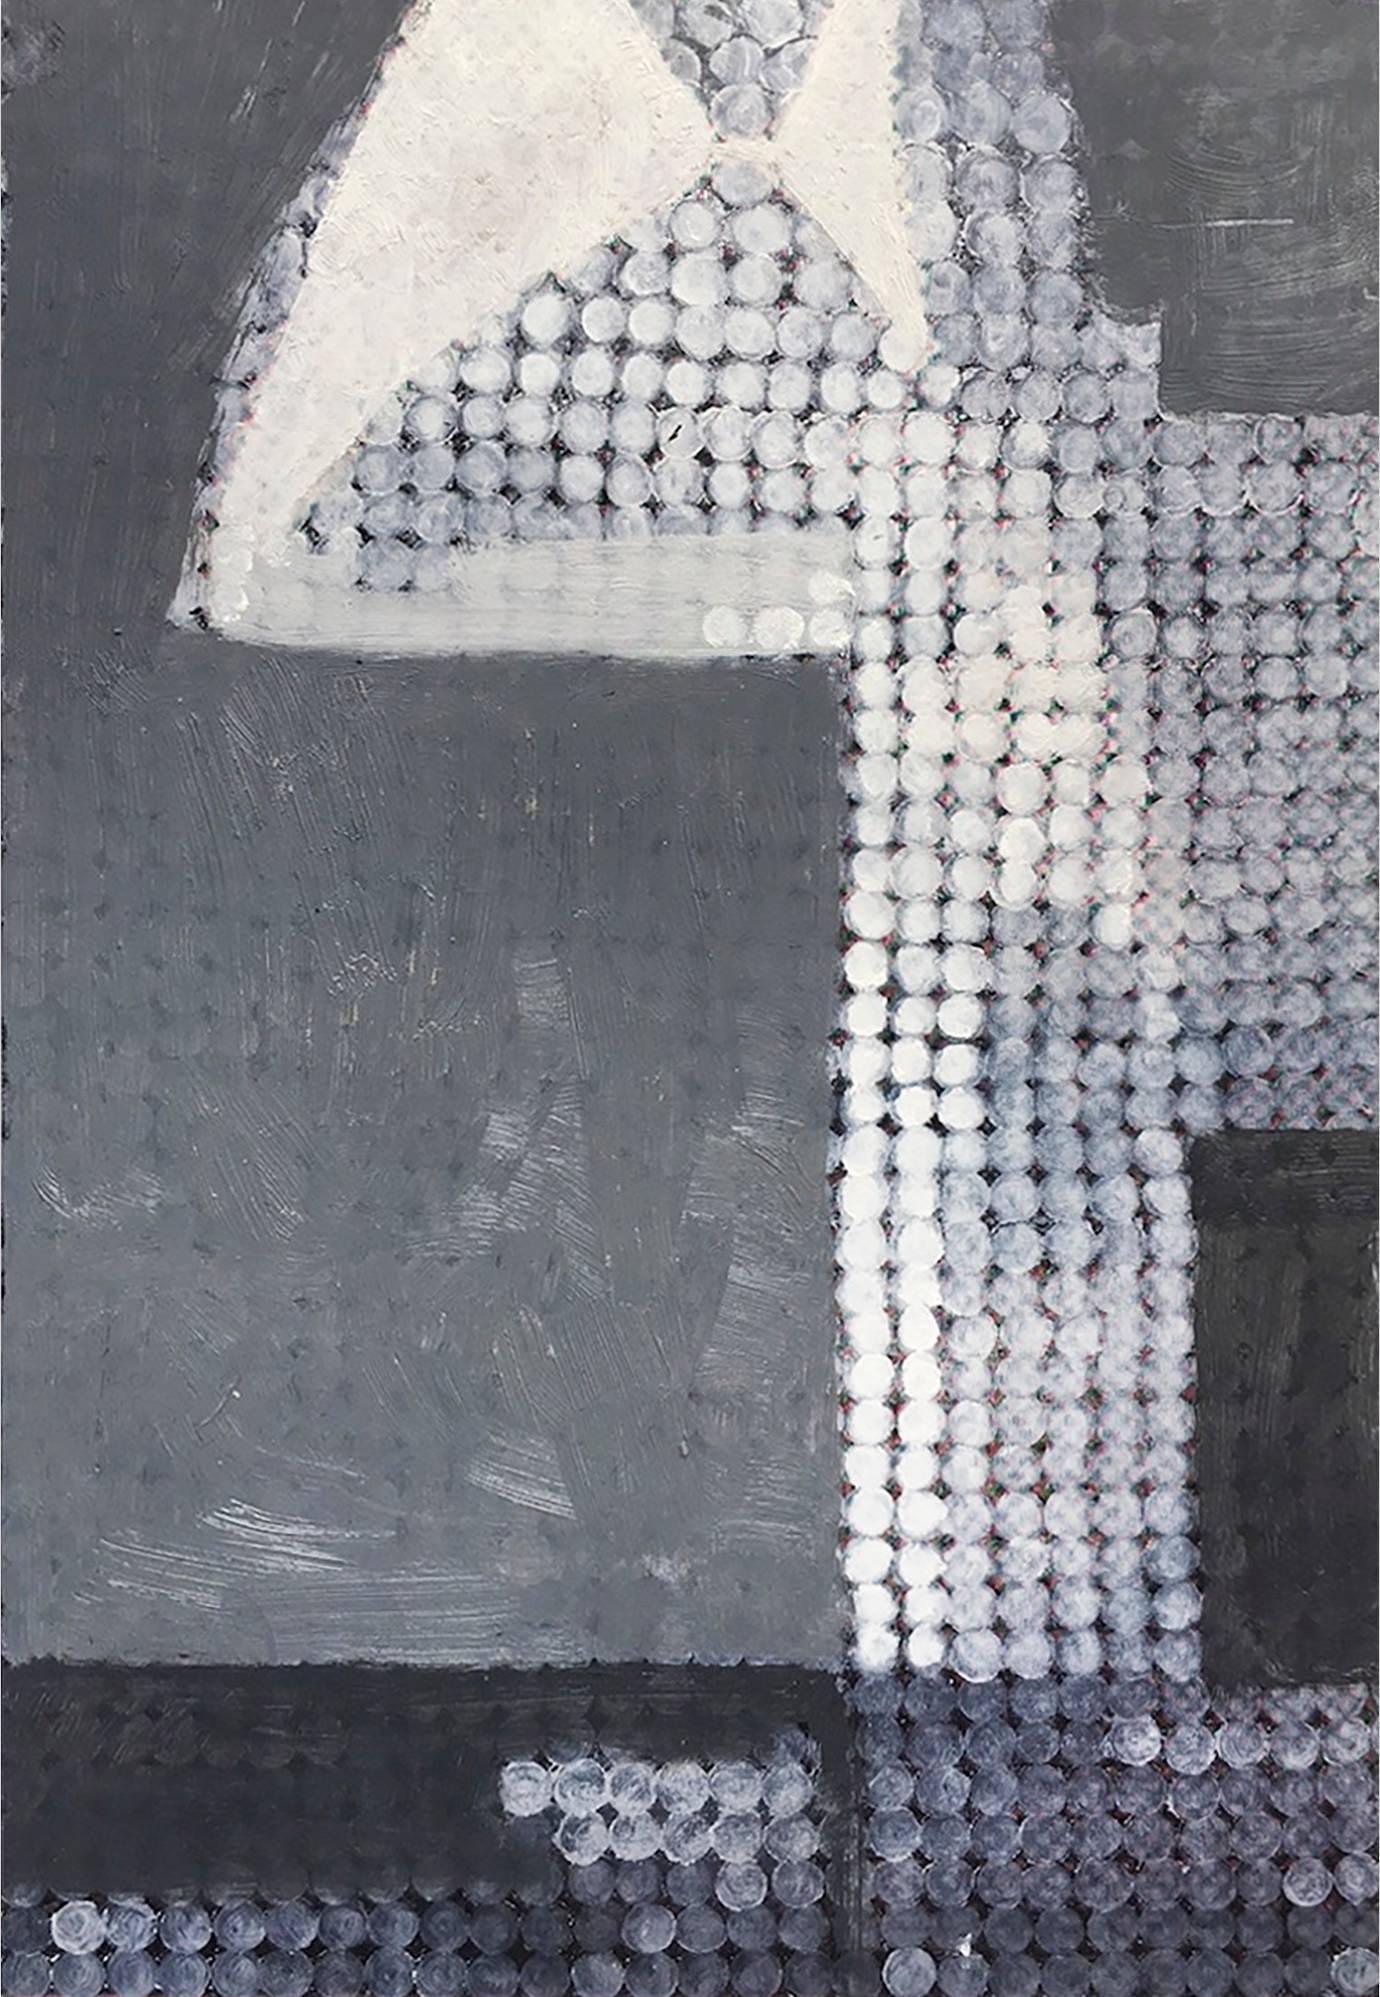 Untitled ( ID 1277) (Abstract Painting)

Oil on paper - Unframed

In her abstract drawings, collages and paintings, Fieroza Doorsen brings to life the tensions and harmonies that emerge when structure meets intuition. Her visual language occupies a